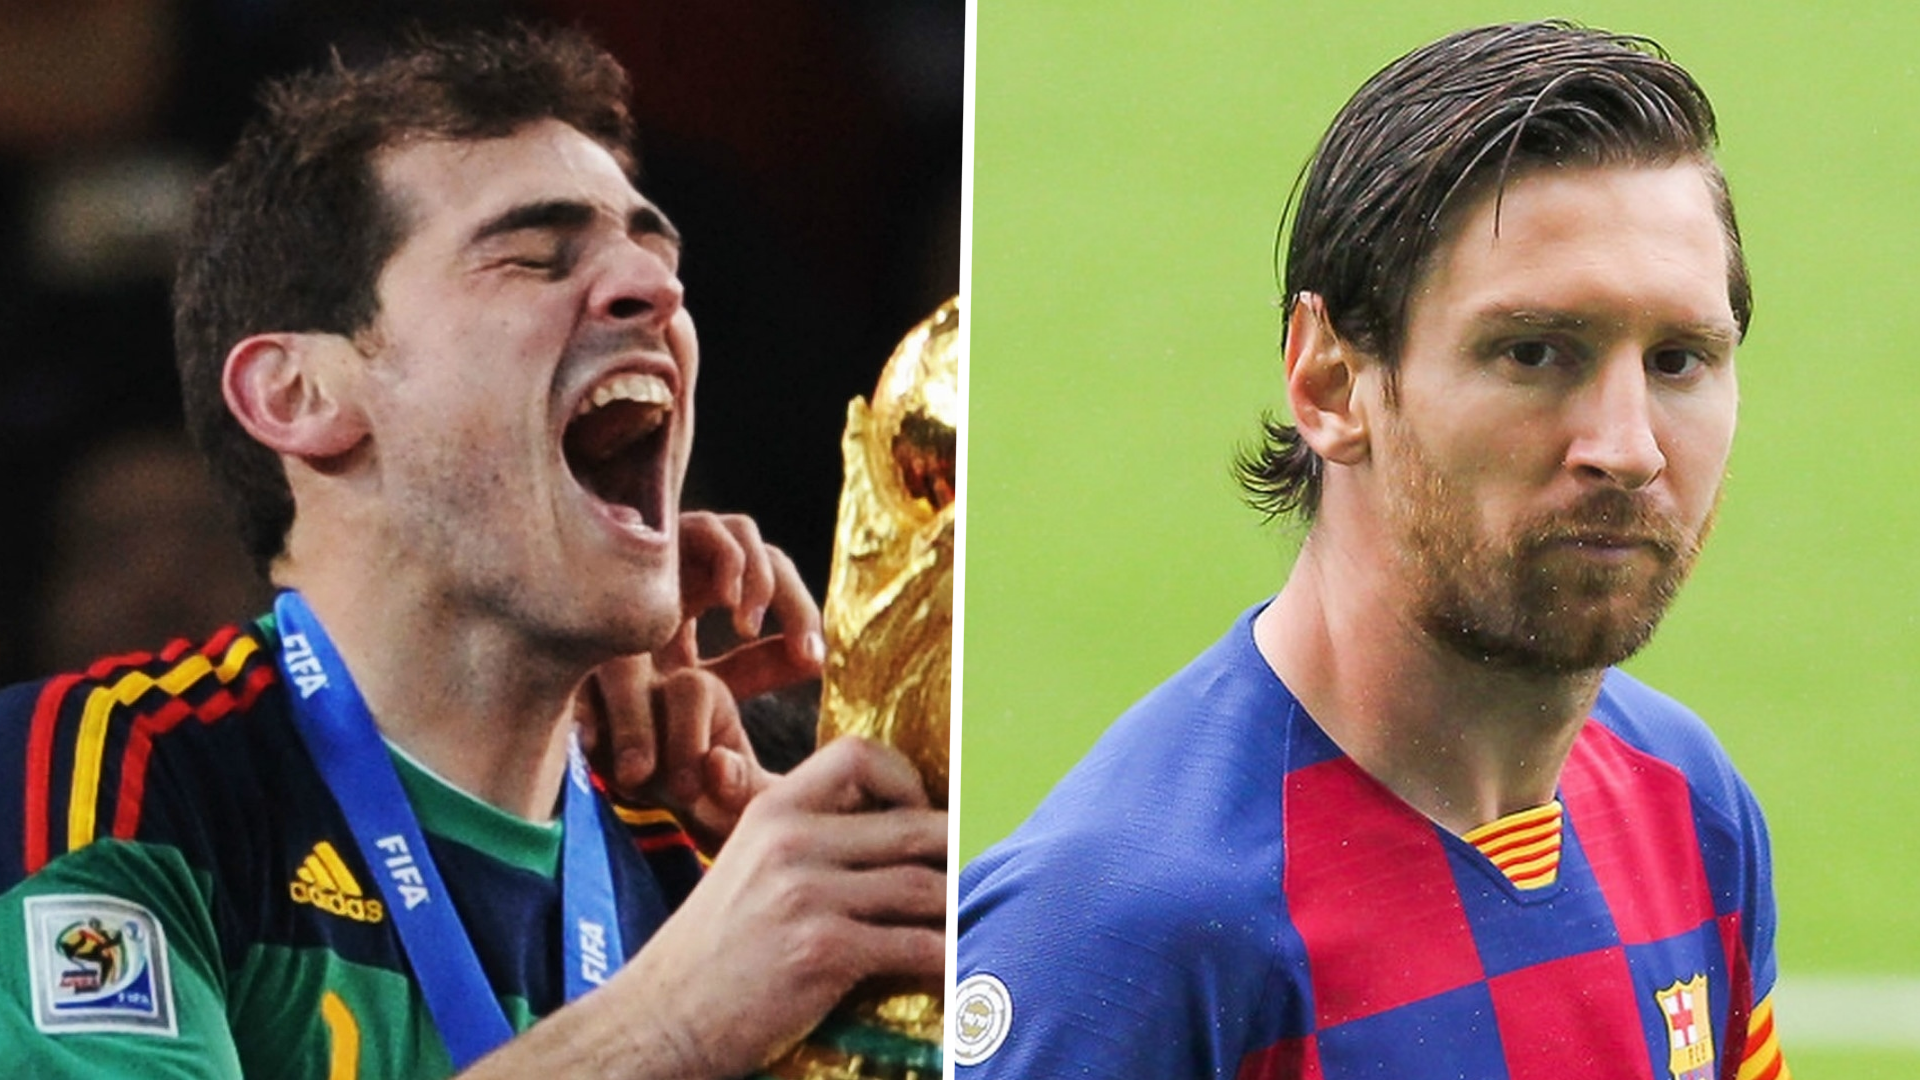 'His legend status was secure long ago' - Barcelona star Messi pays tribute to Real Madrid hero Casillas after retirement